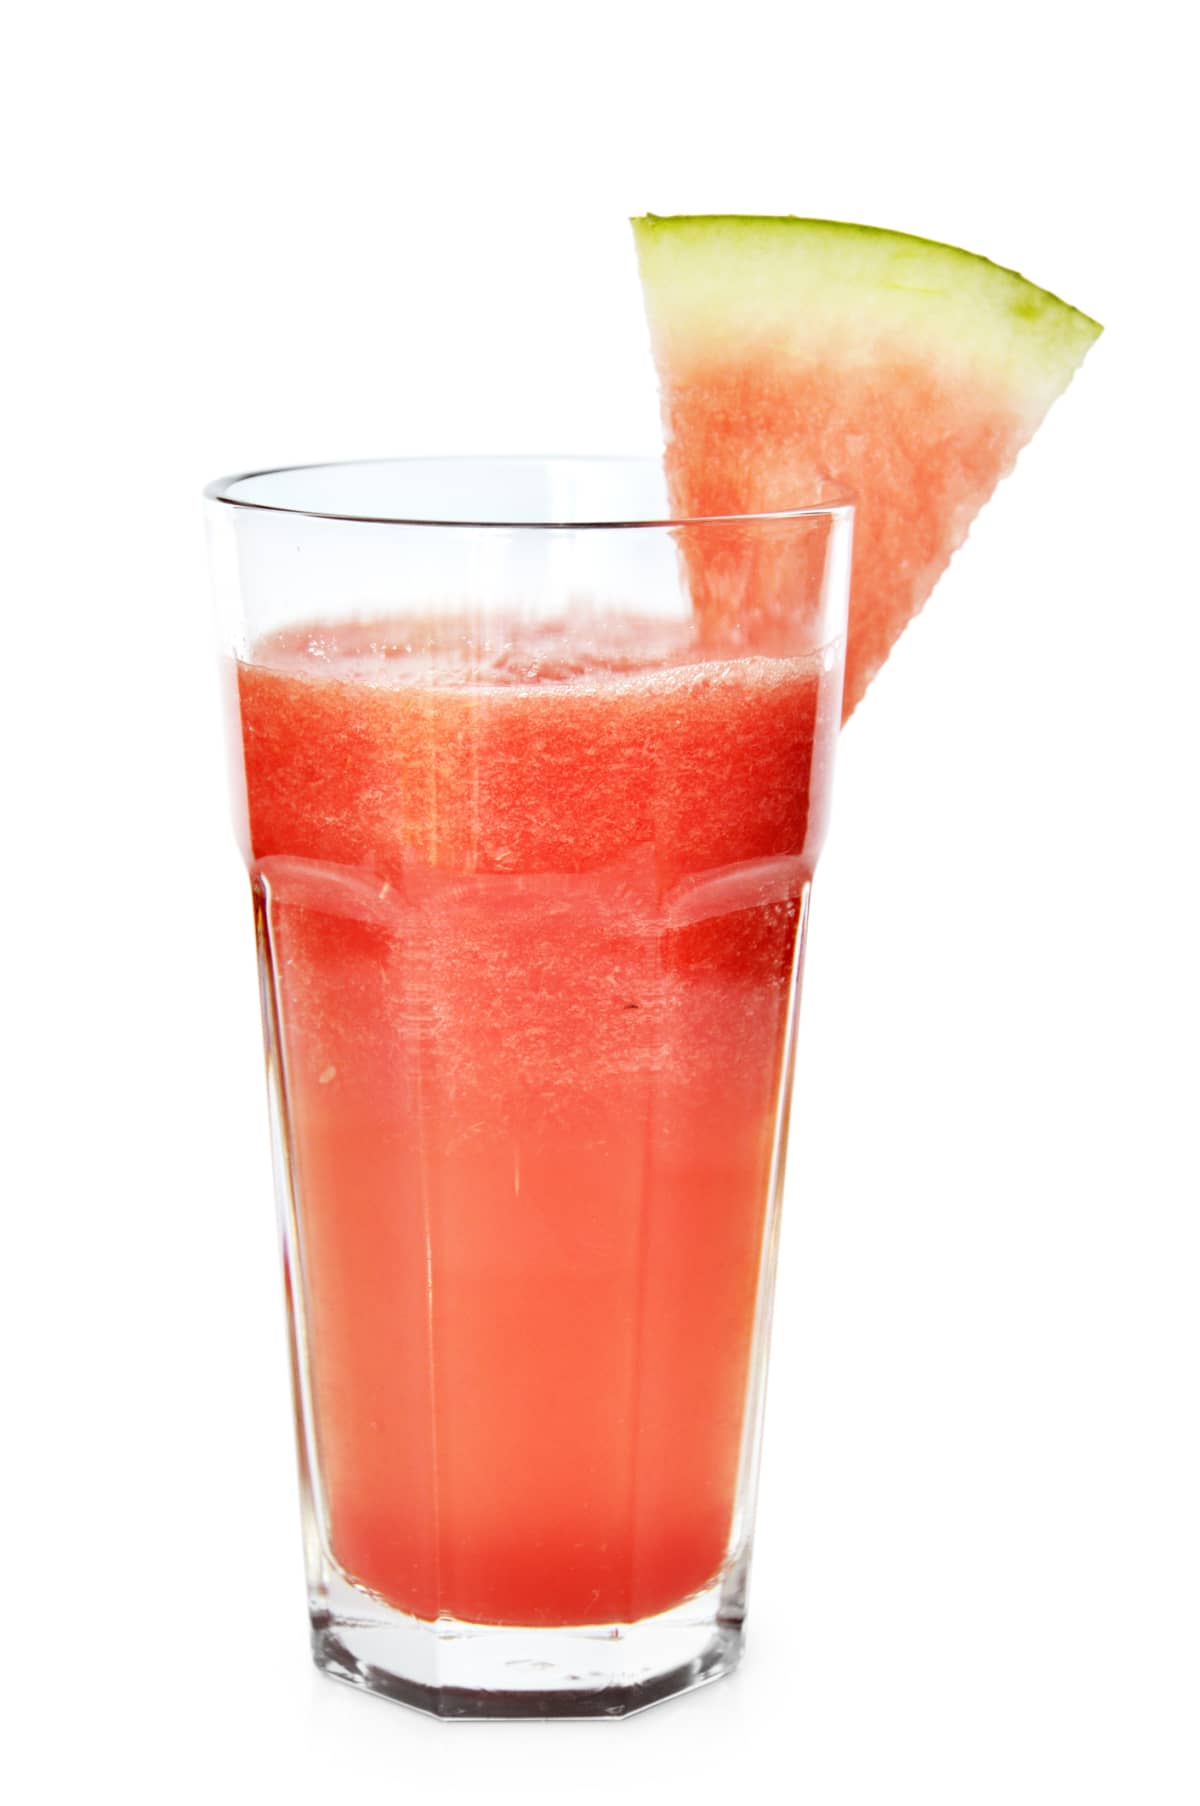 Watermelon smoothie garnished with a watermelon slice isolated on white